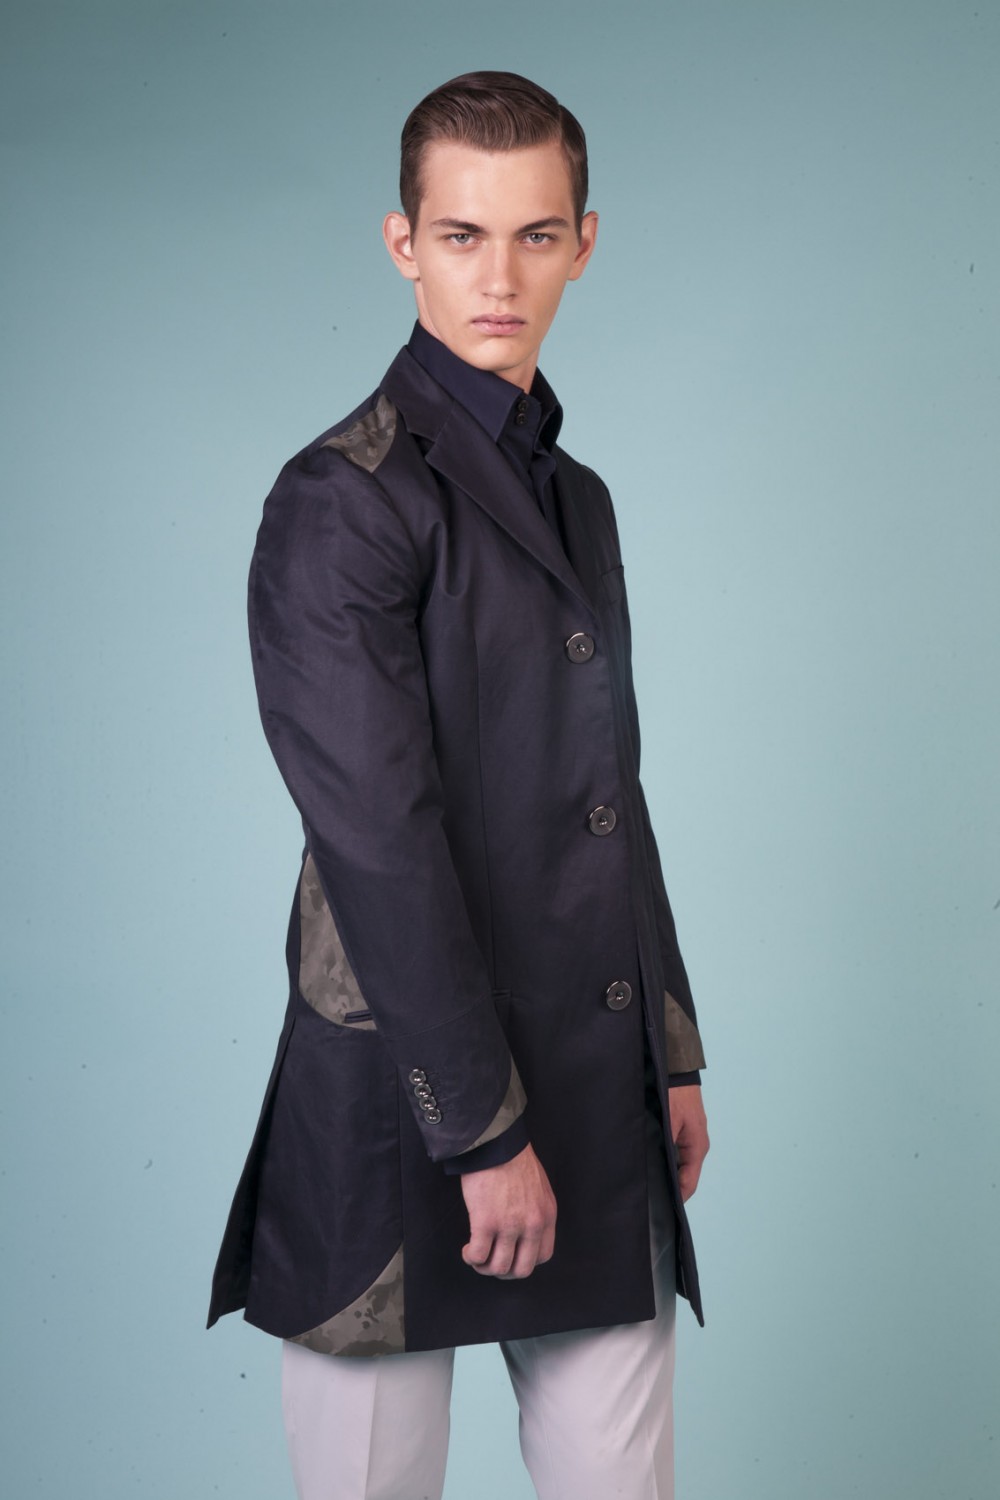 Colour: Navy - Military green camouflage
Fabric: Technical linen - Technical jacquard
Lining: Viscose